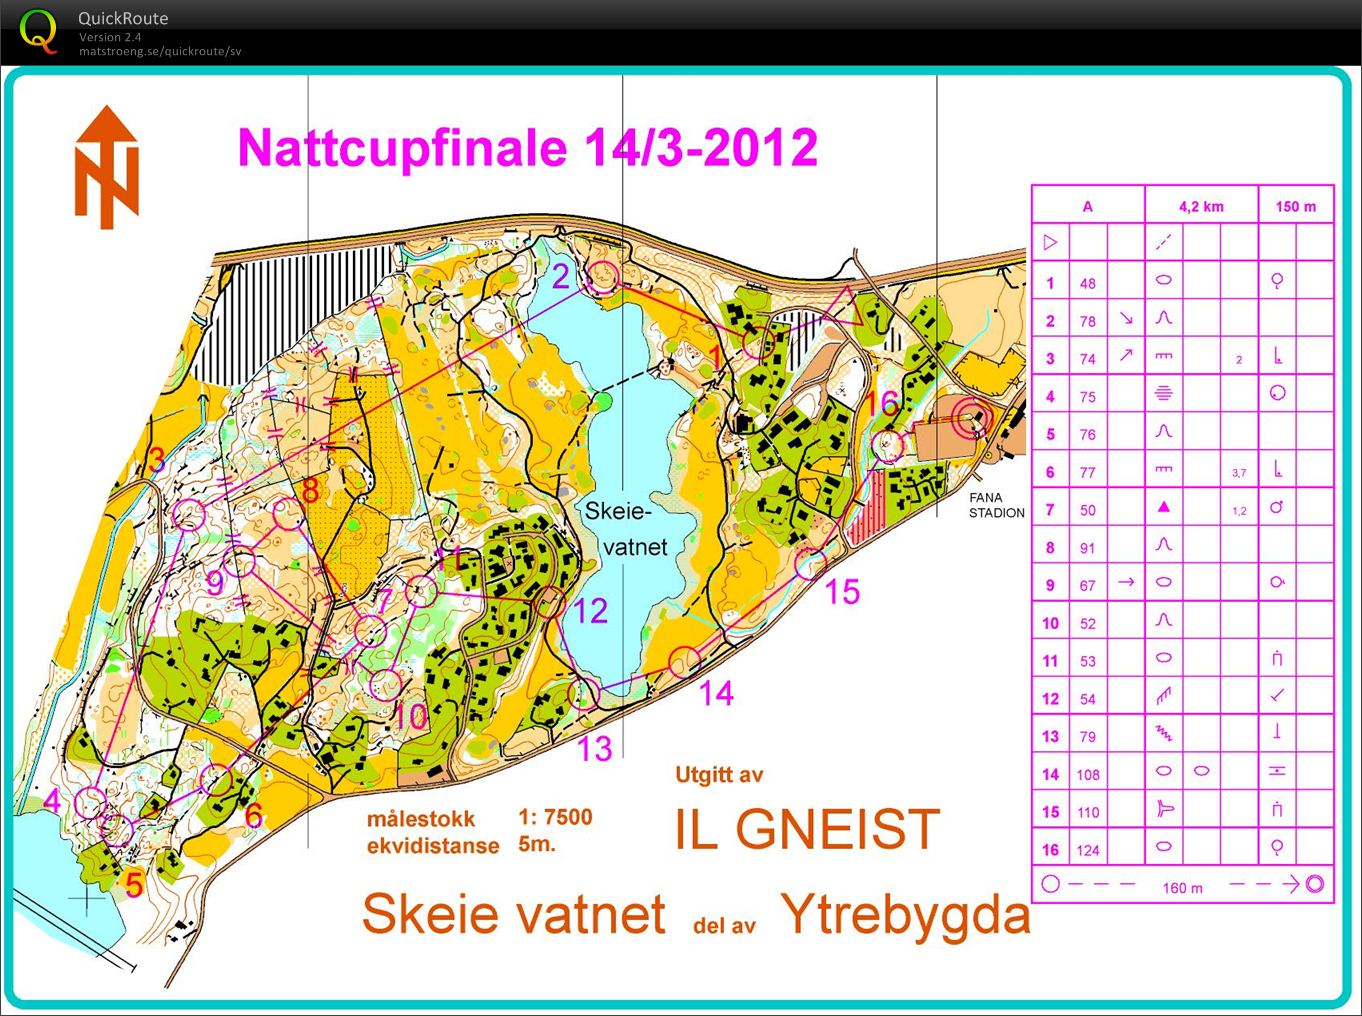 Nattcup, finale 2012 (2012-03-14)